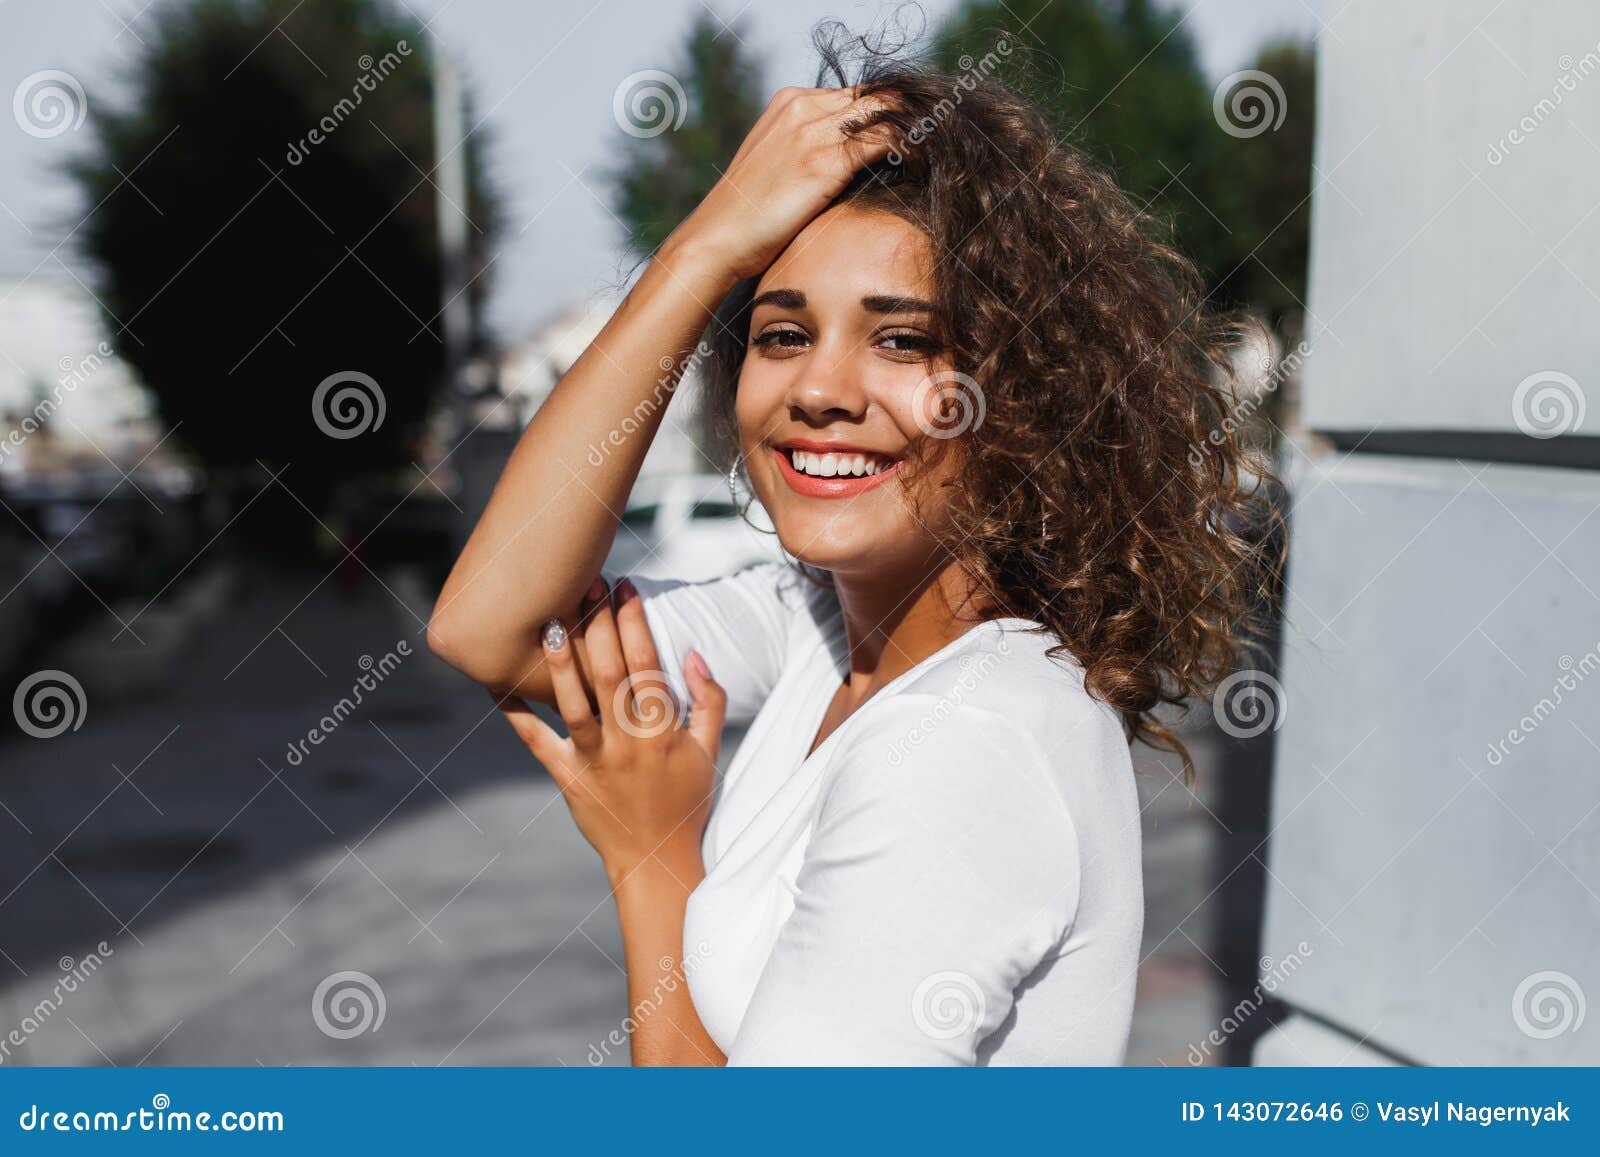 Portrait of Smiling European Woman with Brunette Curly Hair Stock Photo ...